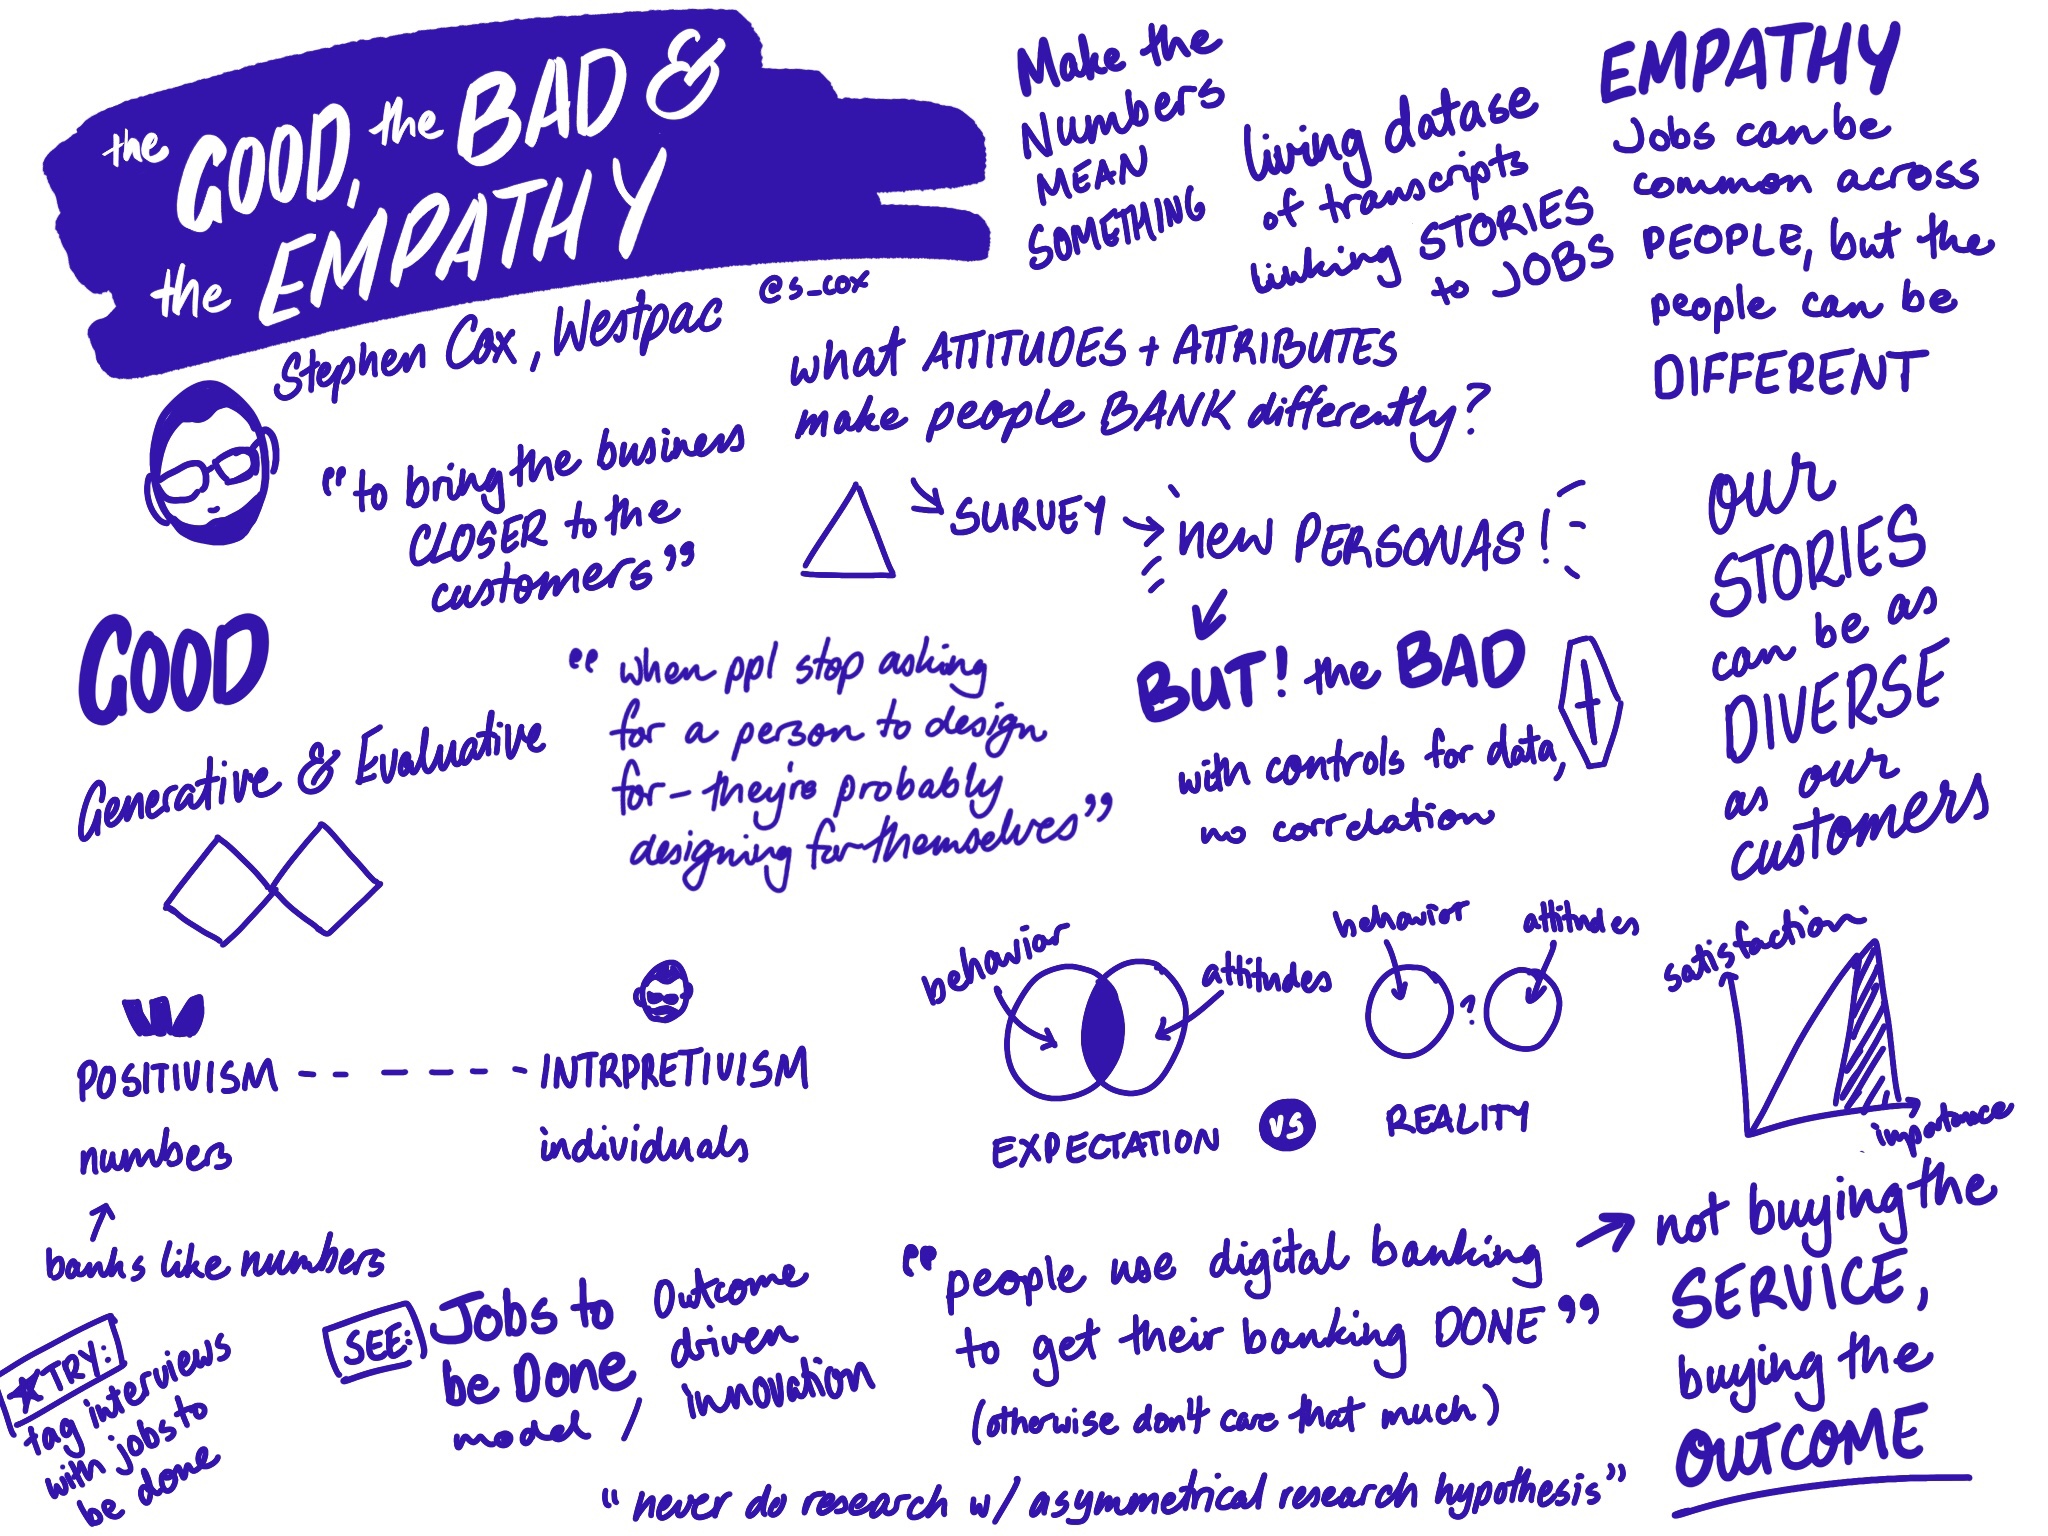 assets/sketching/img_1005-1.jpg|sketchnote: the good, the bad and the empathy